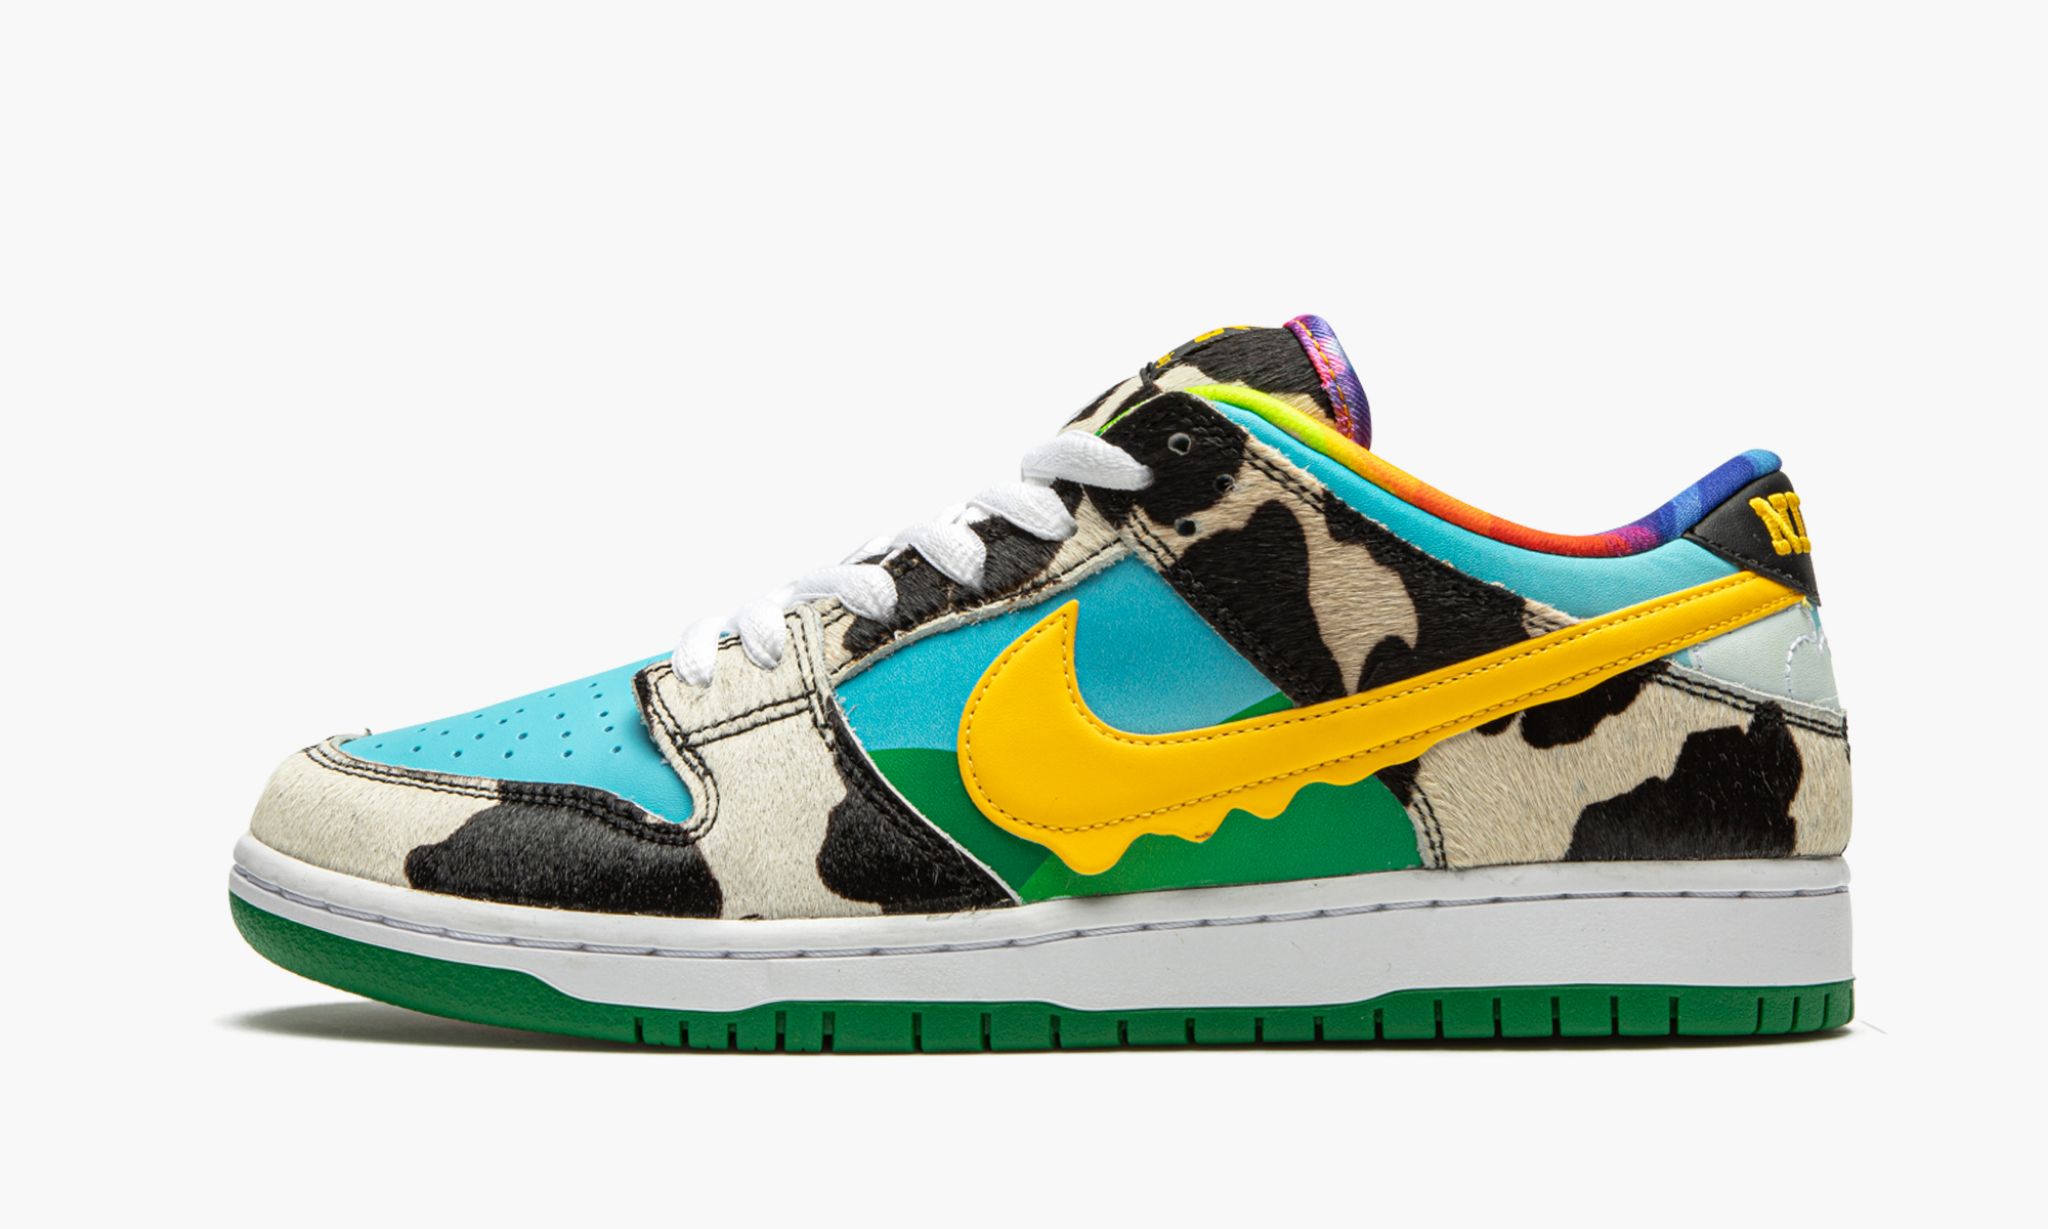 Nike SB DUNK LOW "Ben & Jerry's - Chunky Dunky"